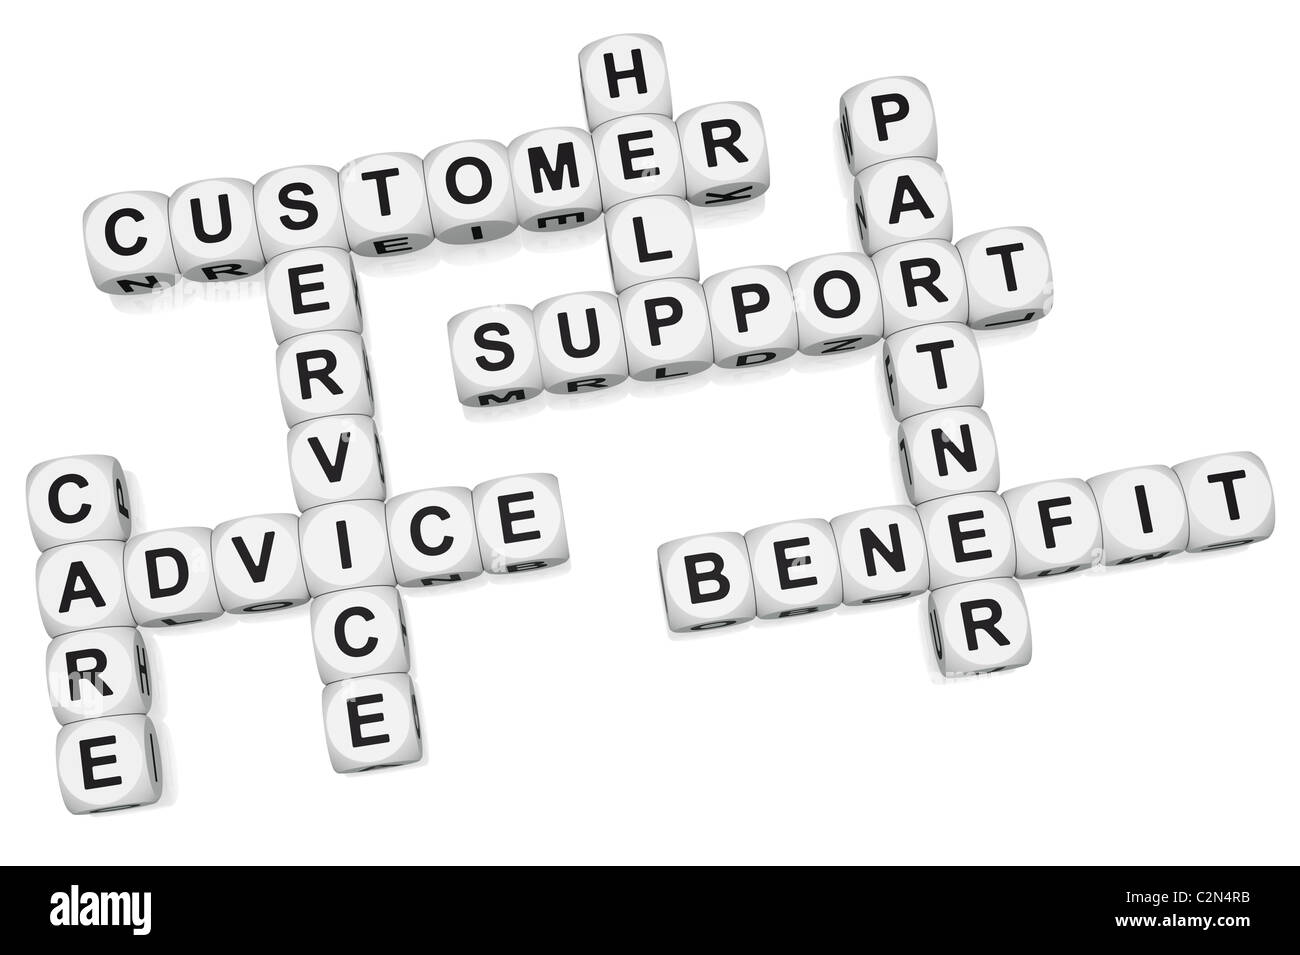 Customer benefit of quality service crossword on white background Stock Photo